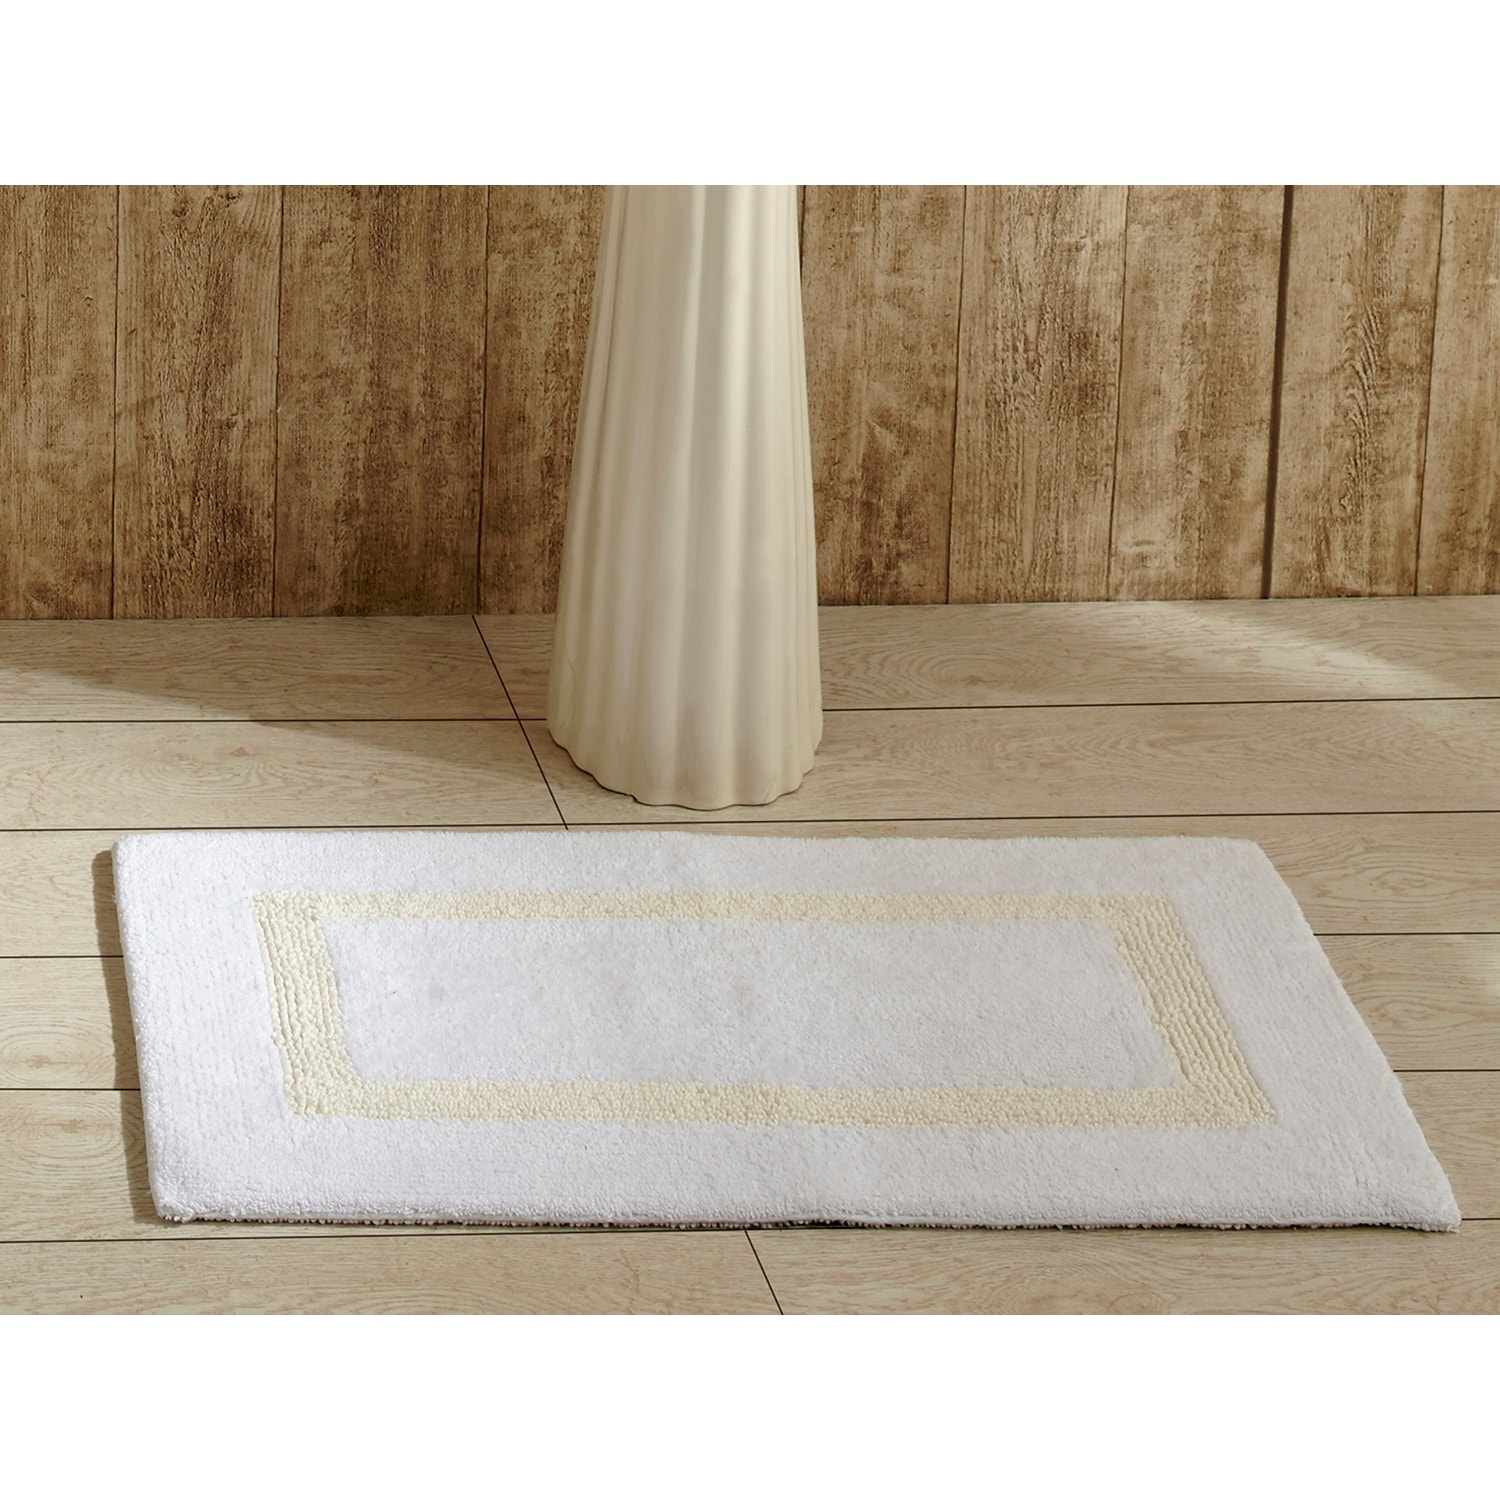 Shaggy Chenille Bathroom Rug, Non Slip Thick, Soft Bath Mats for Bathroom  Extra Absorbent Floor Mats Bath Rugs Set for Kitchen/Living Room (Set of 2,  20 x 32/17 x 24, Dove) 